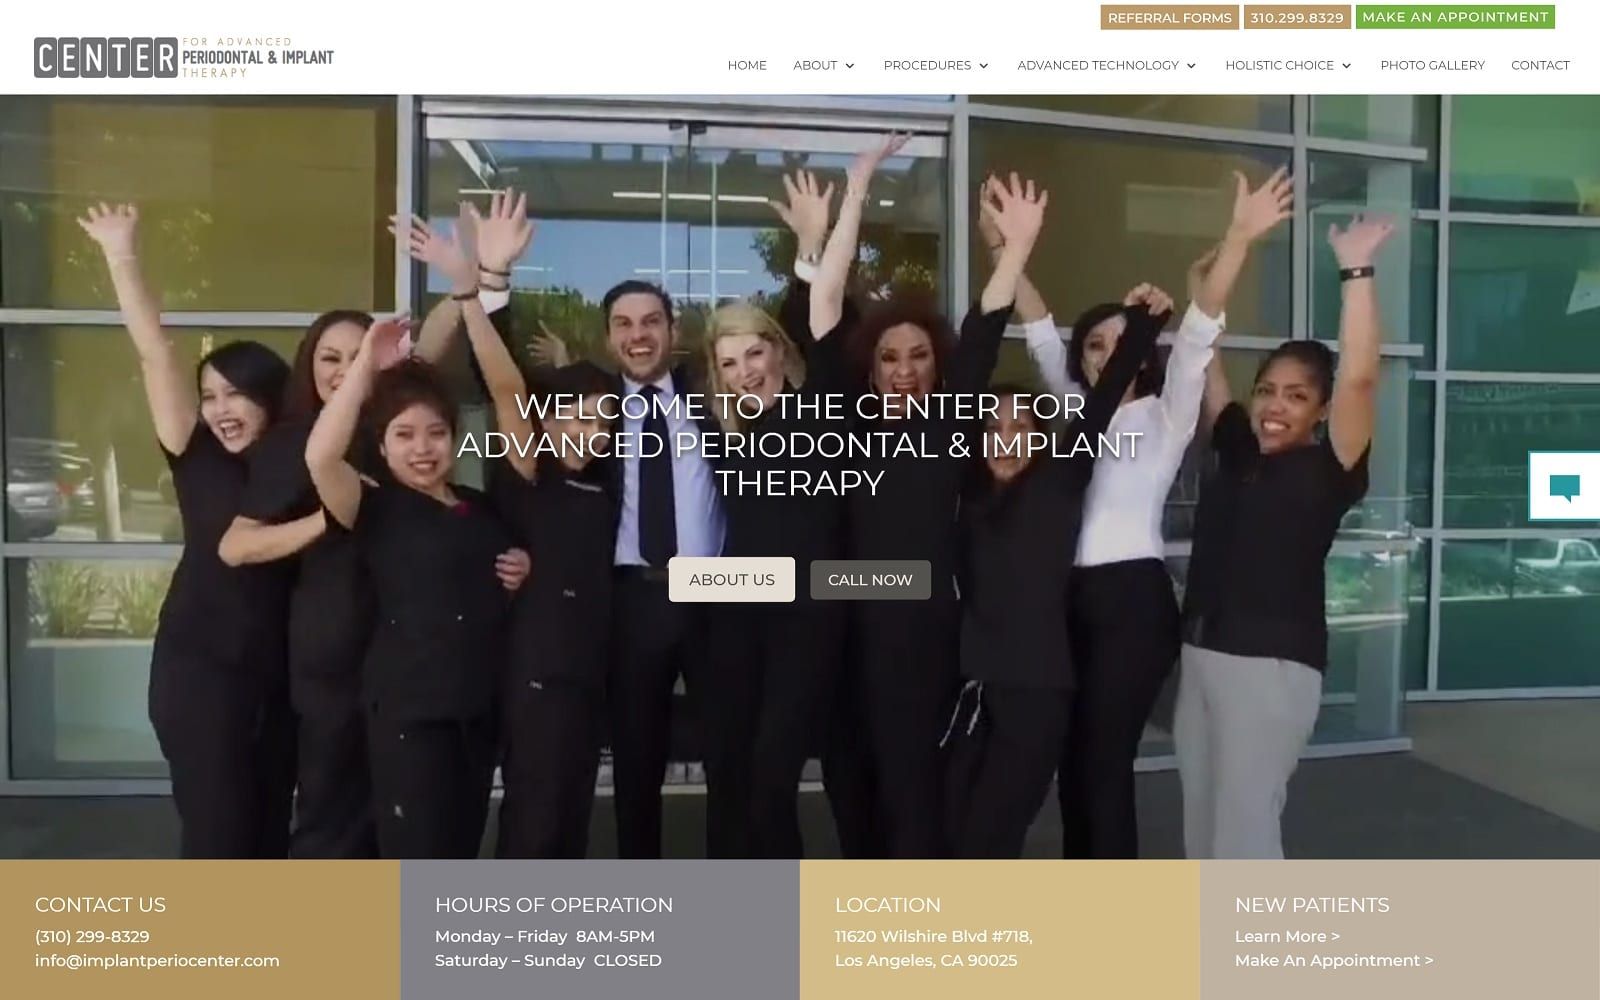 The screenshot of center for advanced periodontal & implant therapy implantperiocenter. Com website